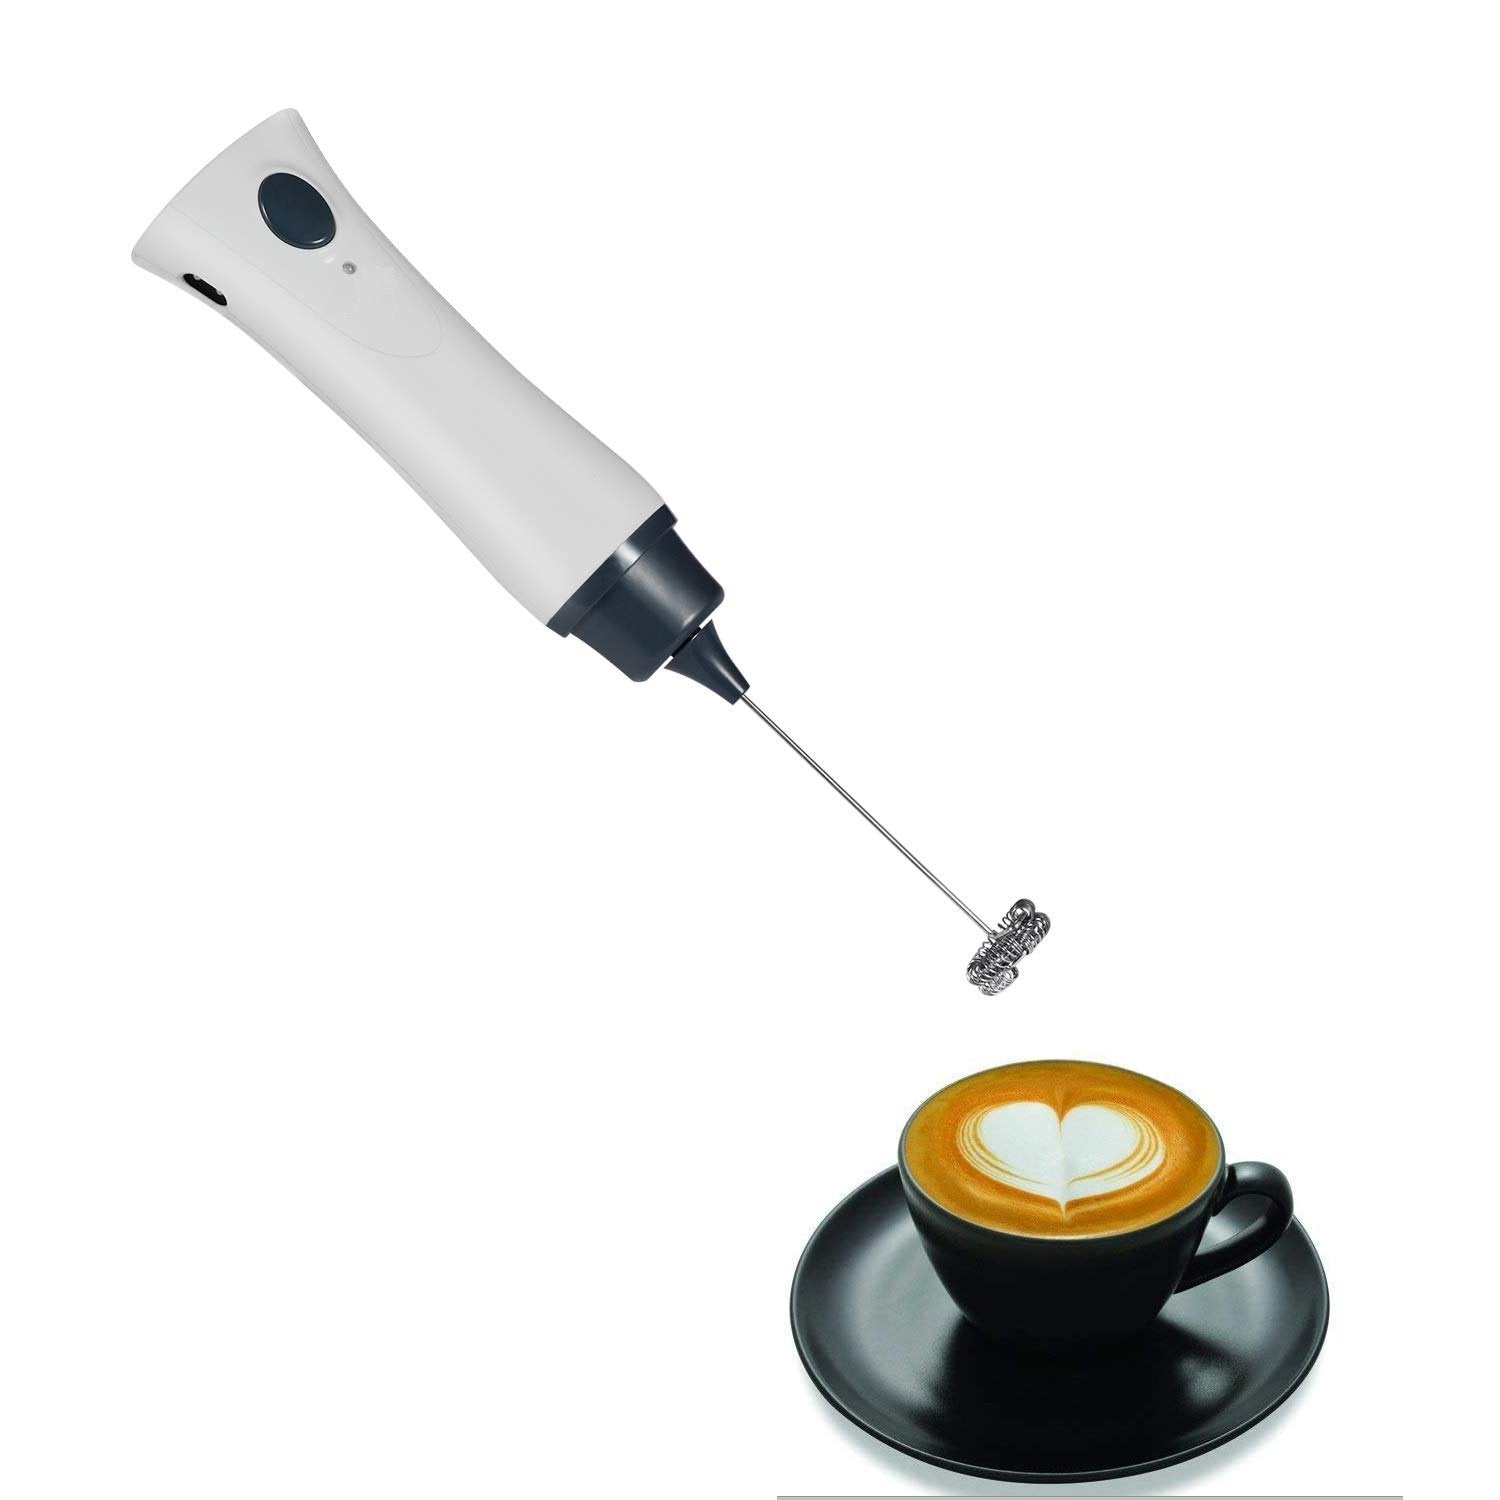  Buy ZOQWEID Electric Handheld Milk Wand Mixer Frother for